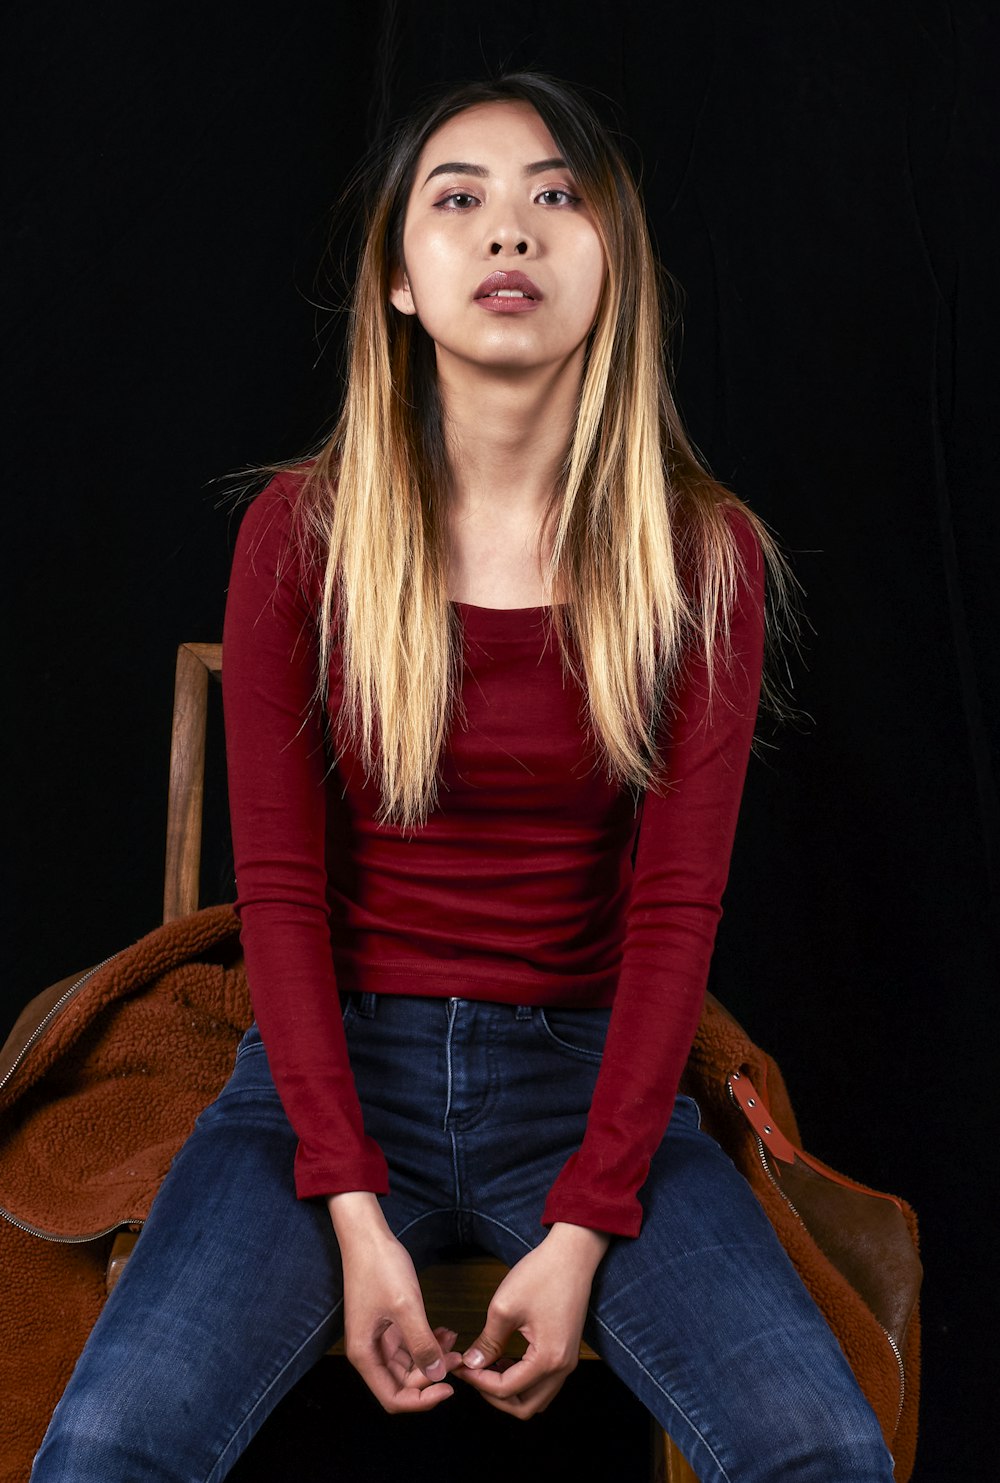 a woman sitting on a chair with her hands in her pockets